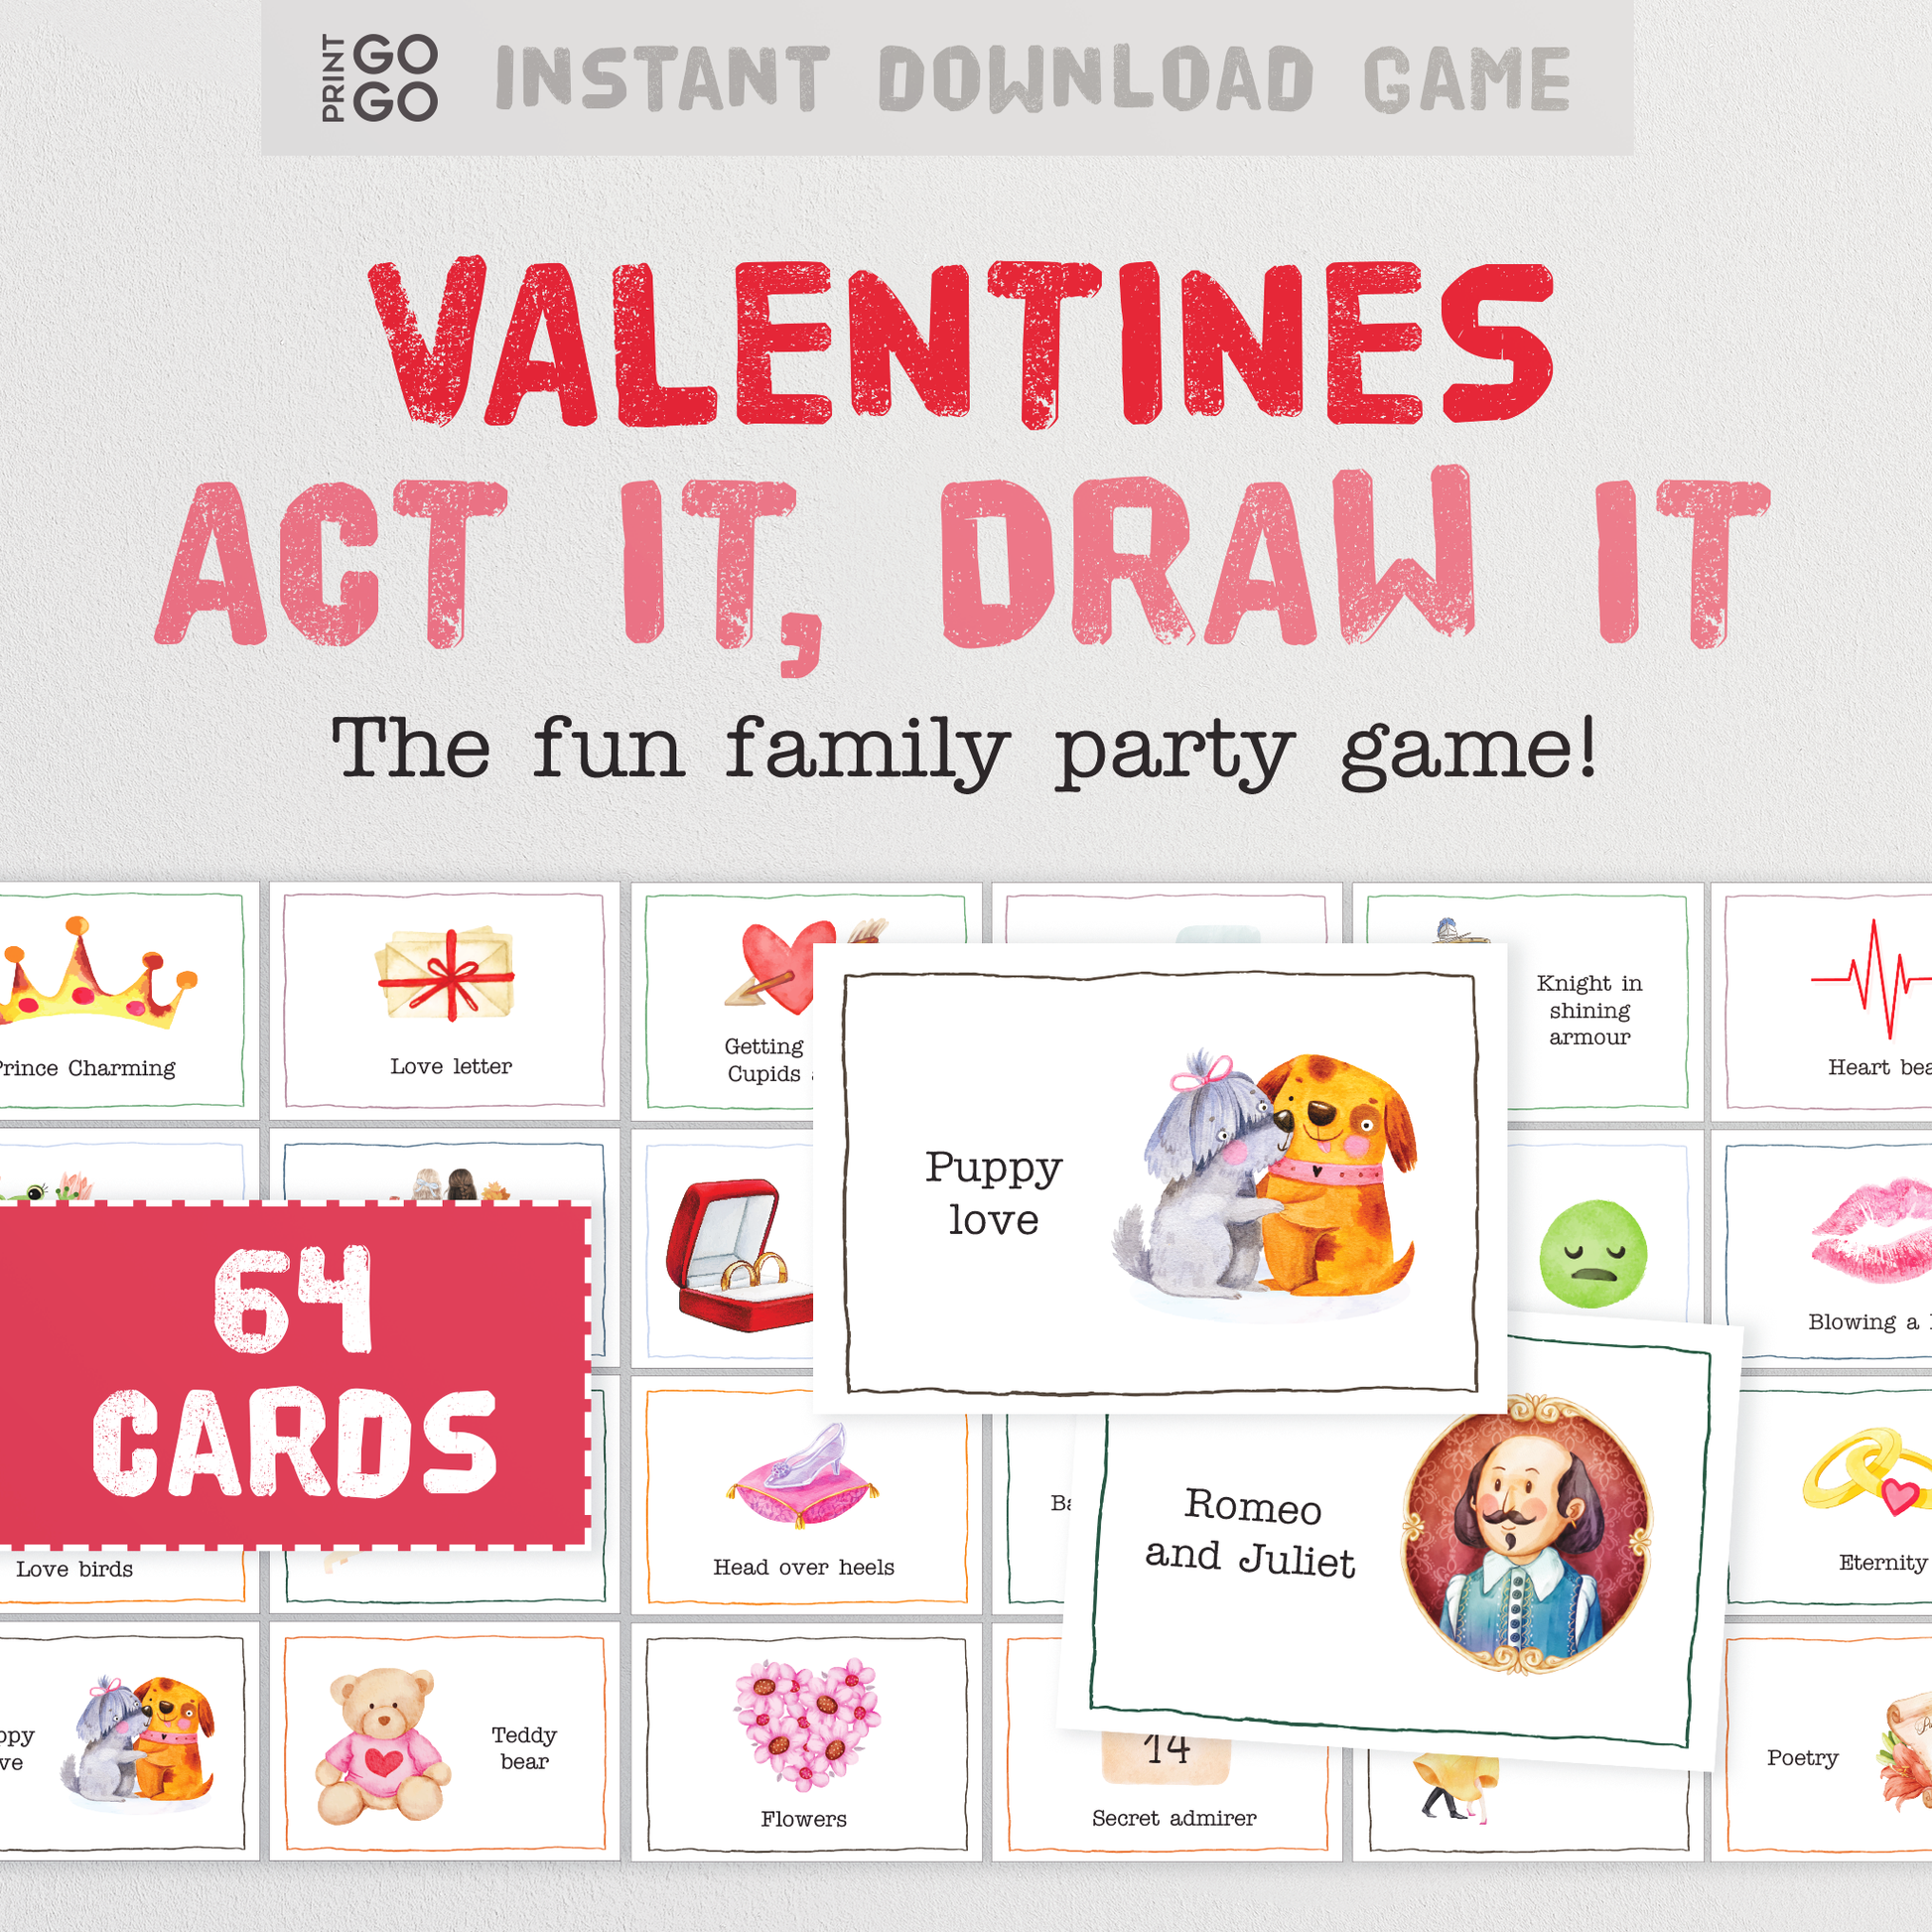 Valentine's Day Game Bundle - Fun Printable Games for Everyone